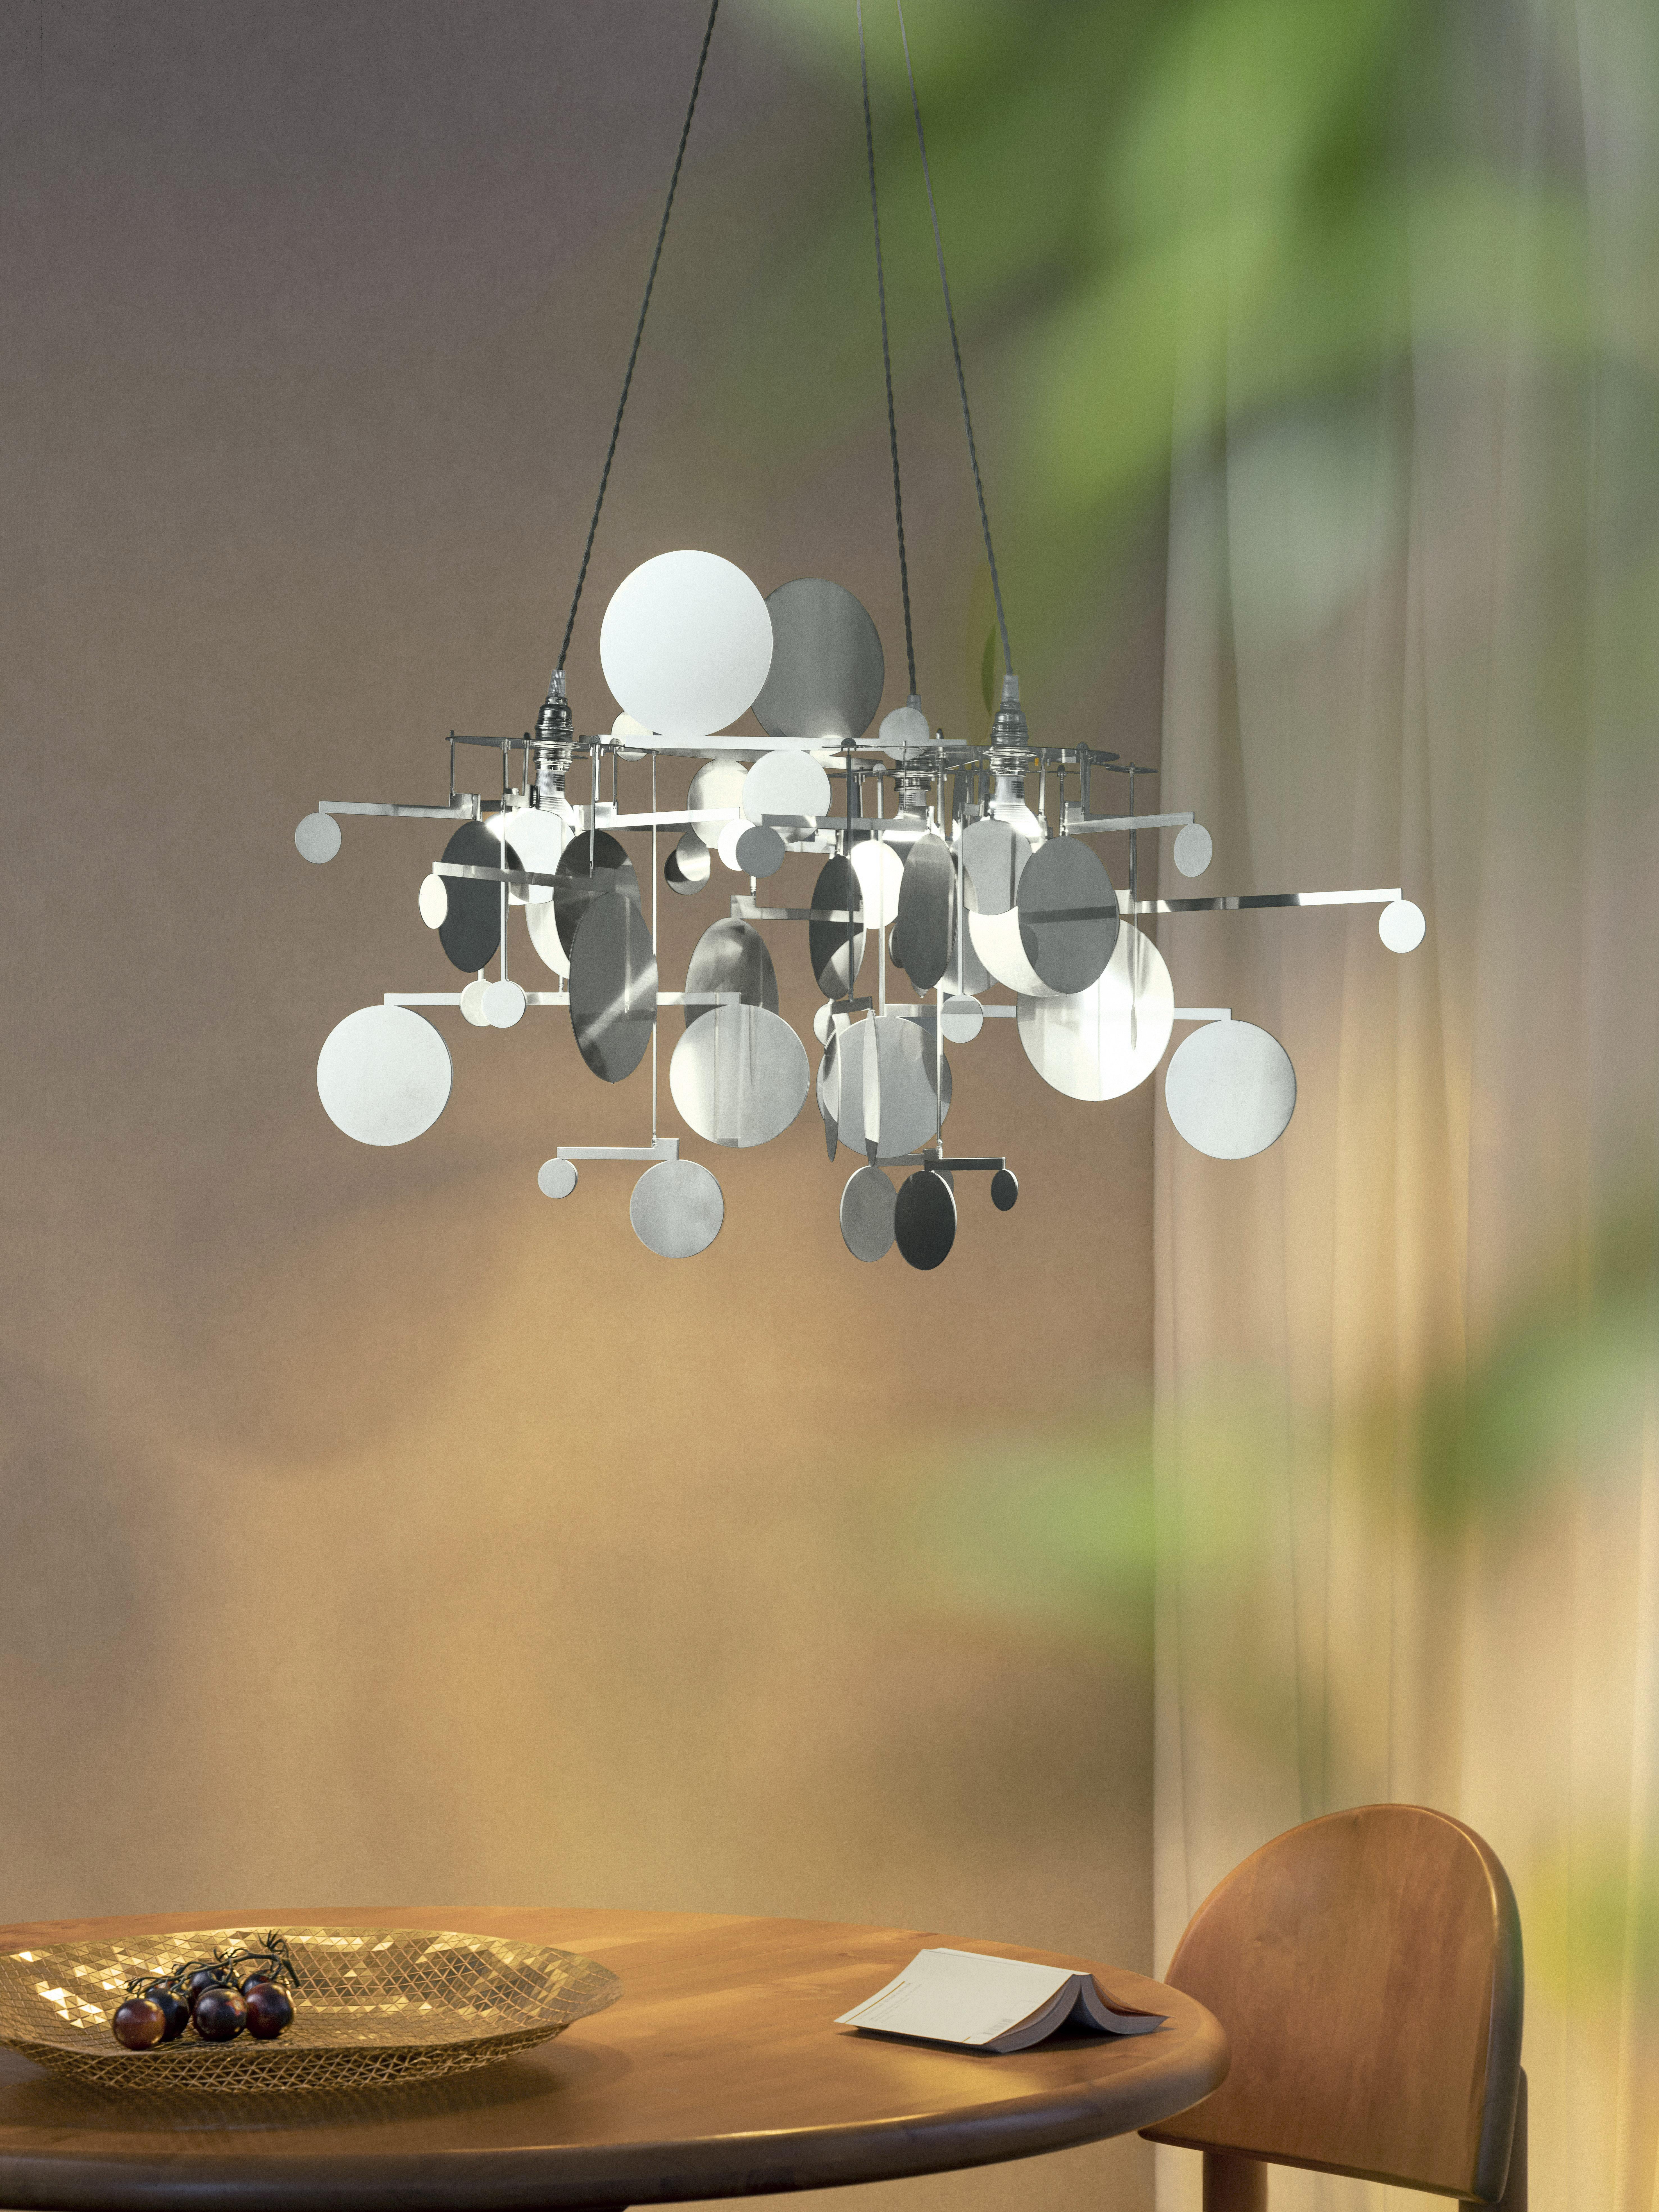 30 free hanging solid brass elements are weighted to reflect and shade 3 bulbs, creating a warm, gently shifting glow. A conversation piece that works as well in a Flemish town house as in a luxury space station.

Material:
Lamp available in